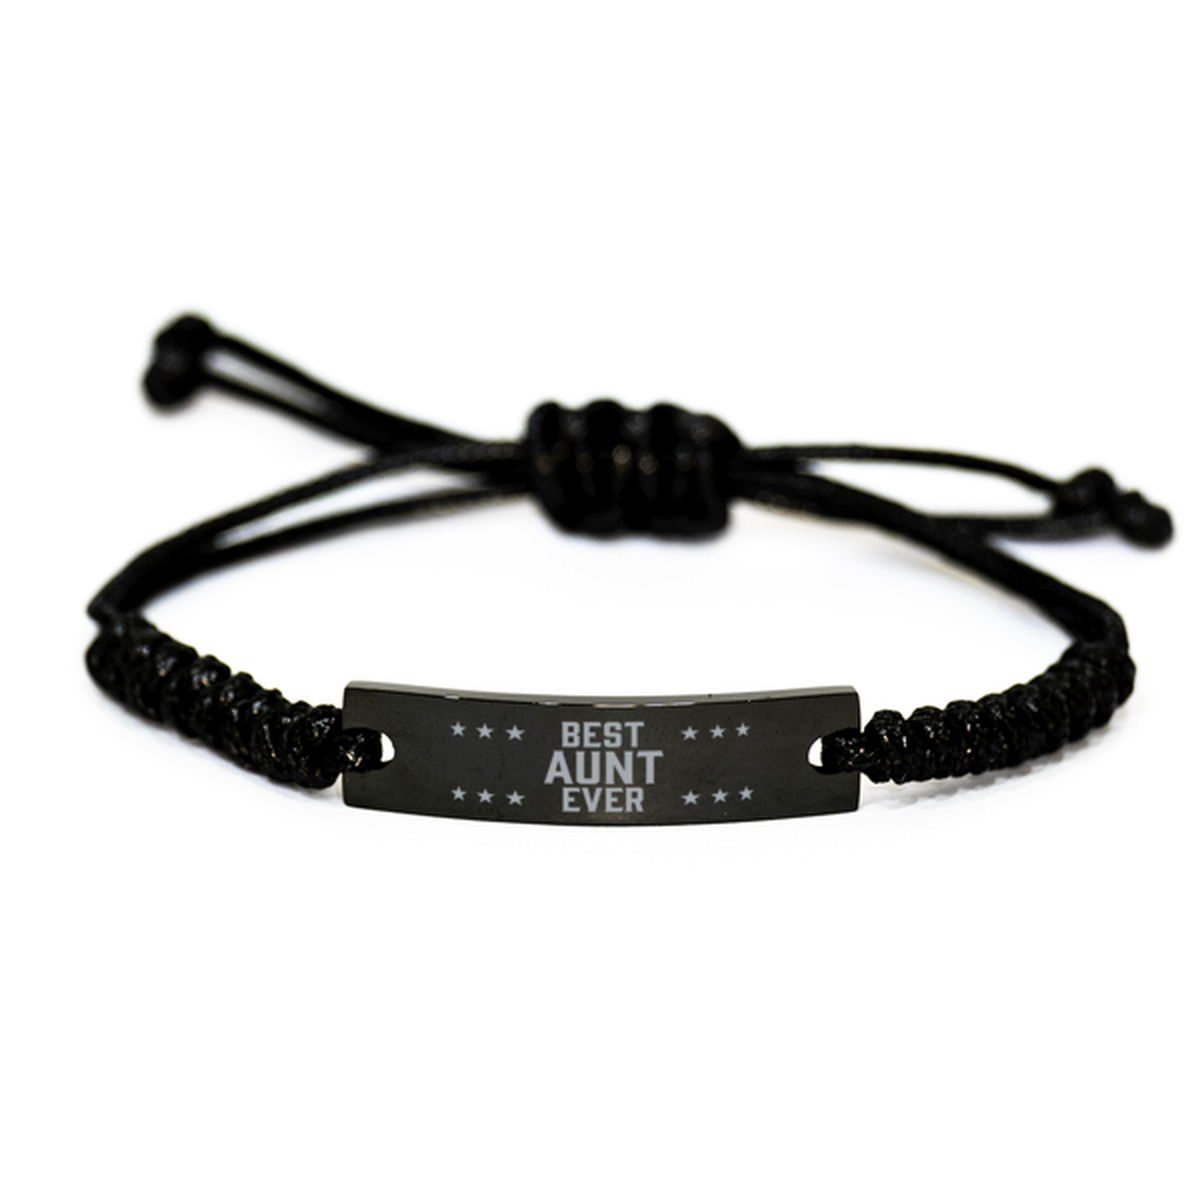 Best Aunt Ever Aunt Gifts, Funny Engraved Rope Bracelet For Aunt, Birthday Family Gifts For Women